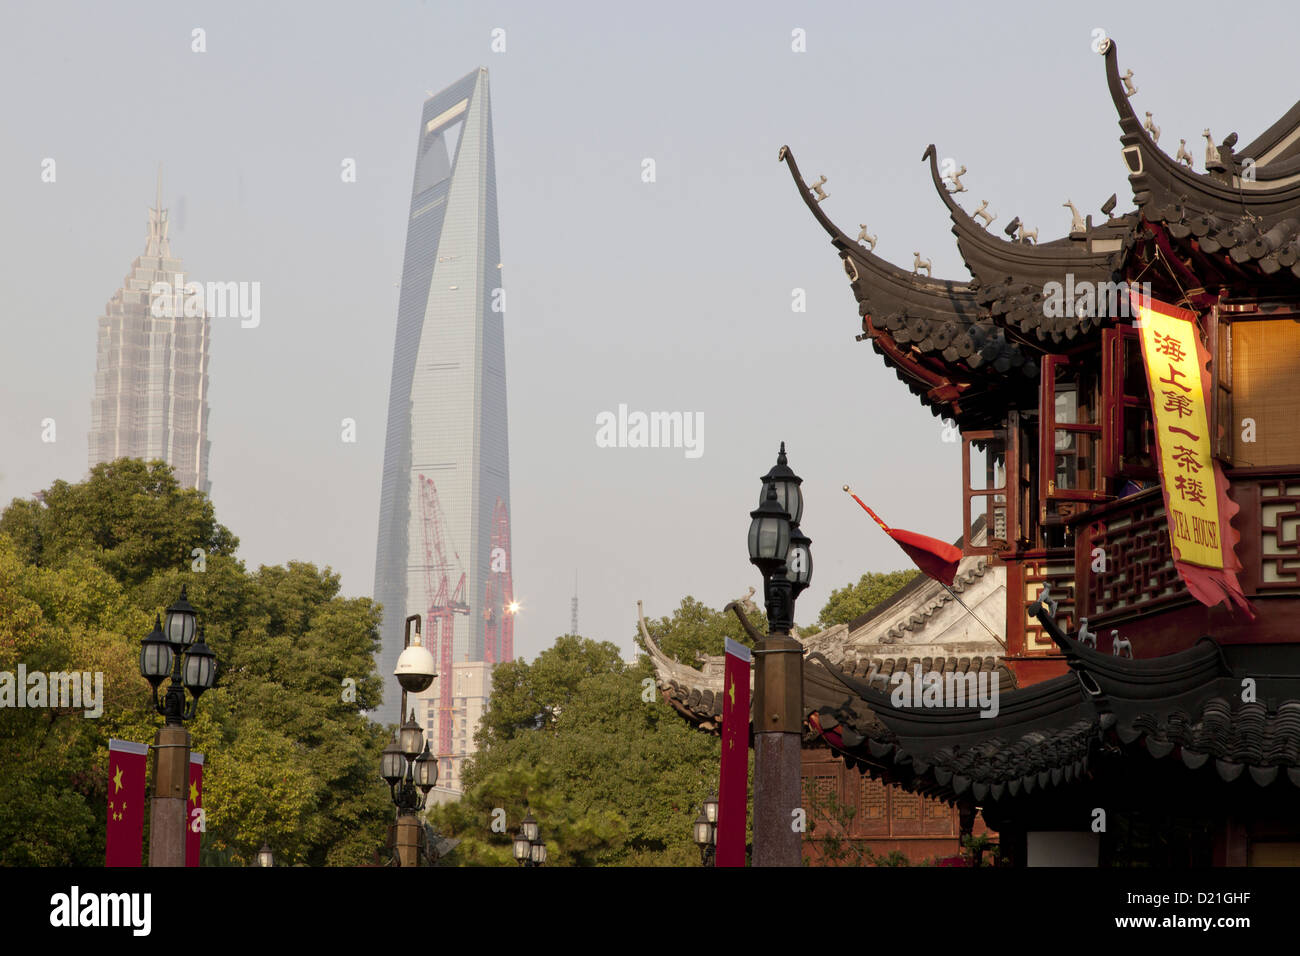 View of Huxinting Teahouse at Yu Yuan Garden and World Financial Center, Shanghai, China, Asia Stock Photo